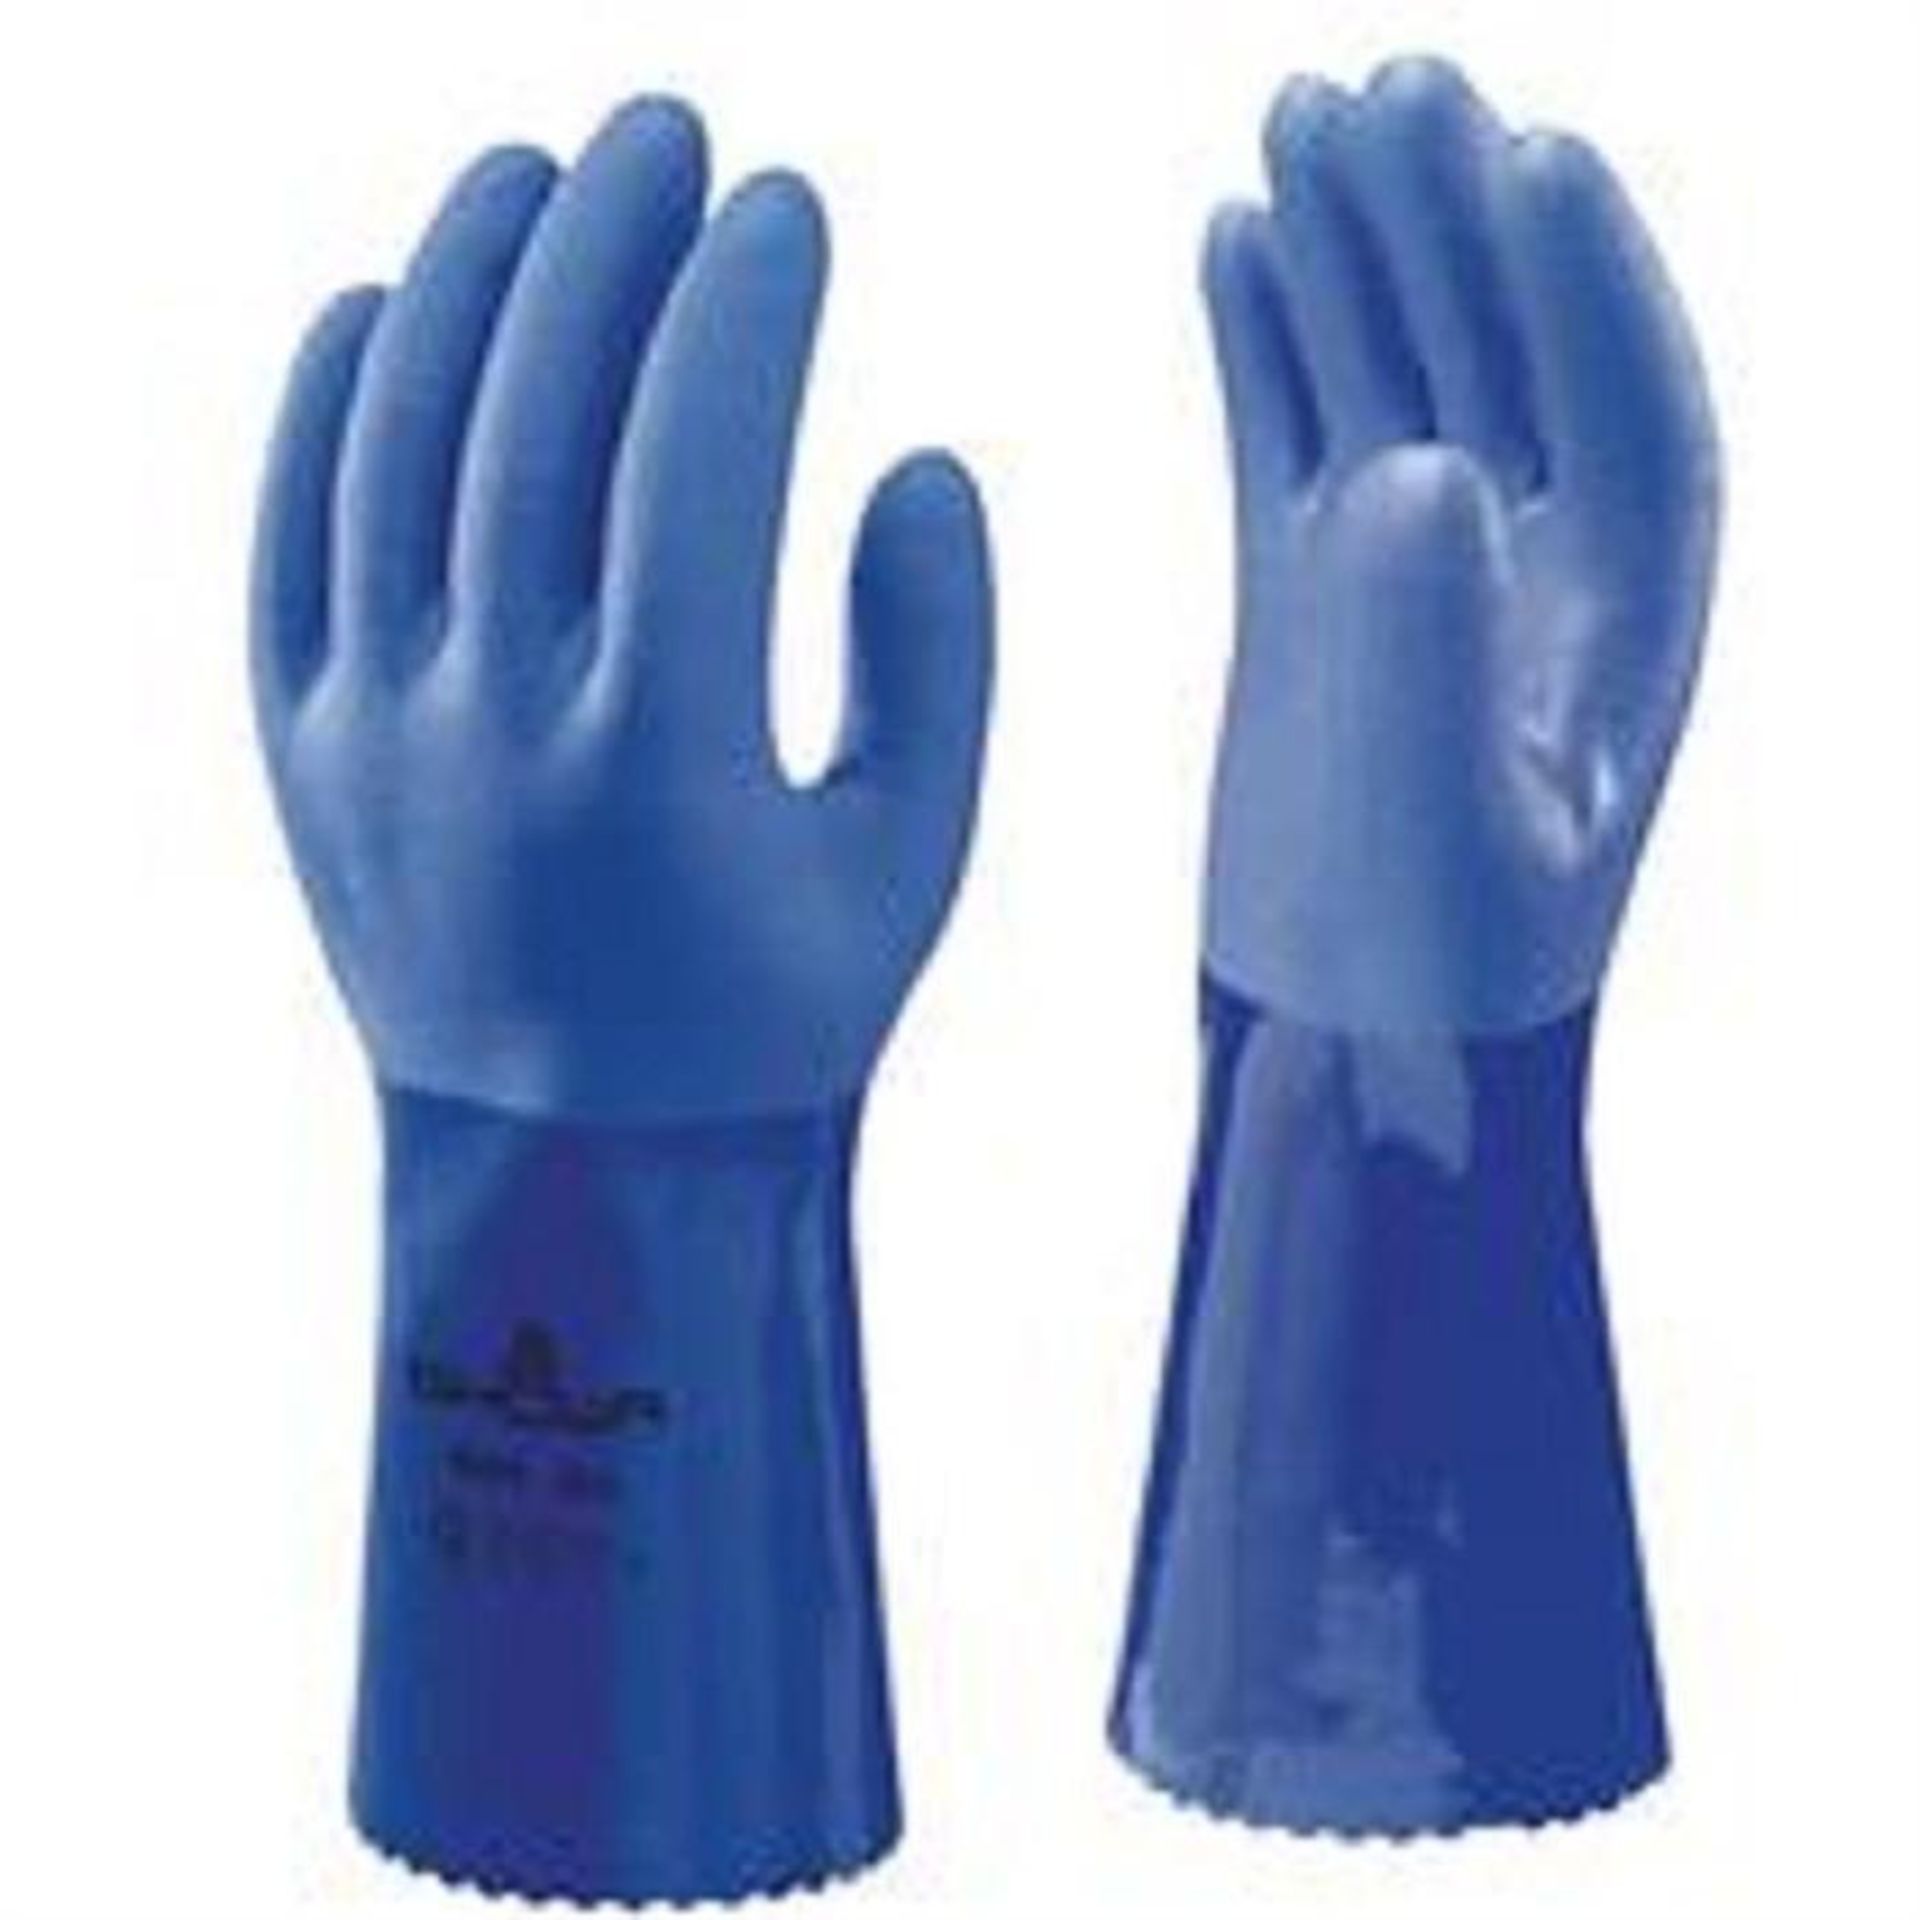 120 Pairs Showa 660 Chemical Resistant PVC Gloves